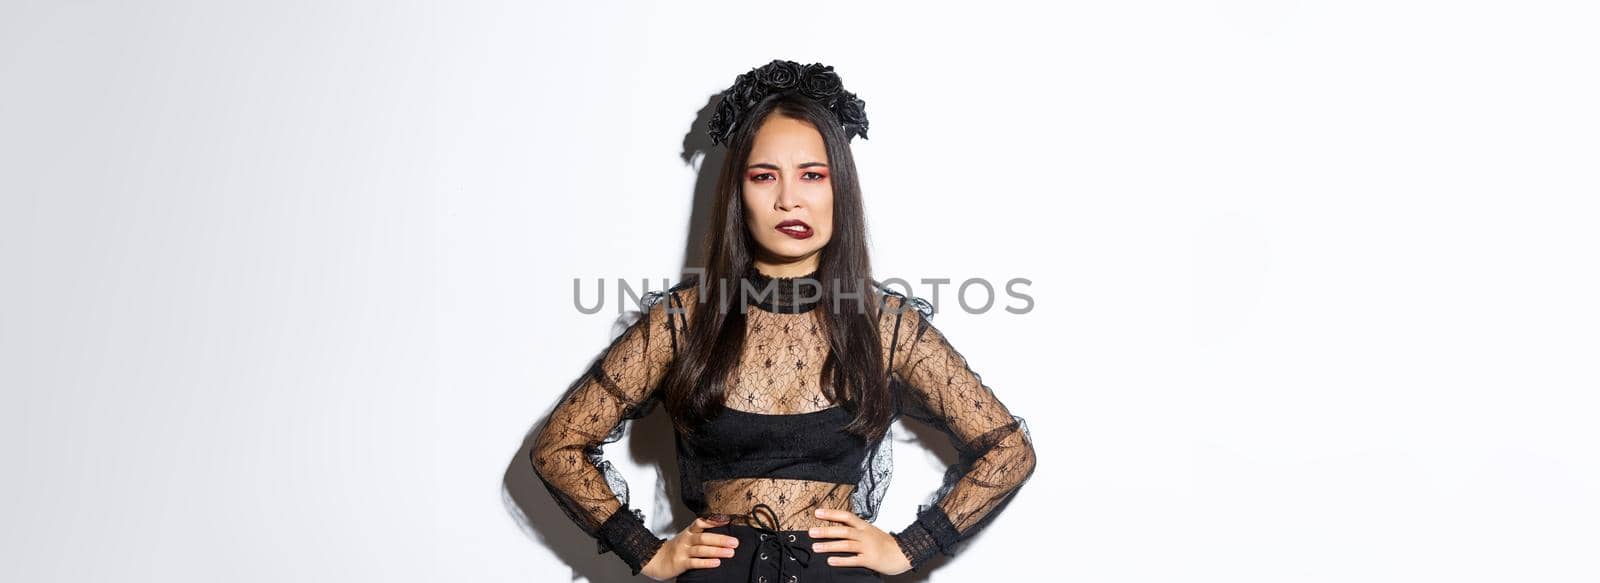 Annoyed and bothered evil witch looking complicated and biting lower lip, standing over white background in black lace dress and wreath. Girl in halloween costume trick or treating.